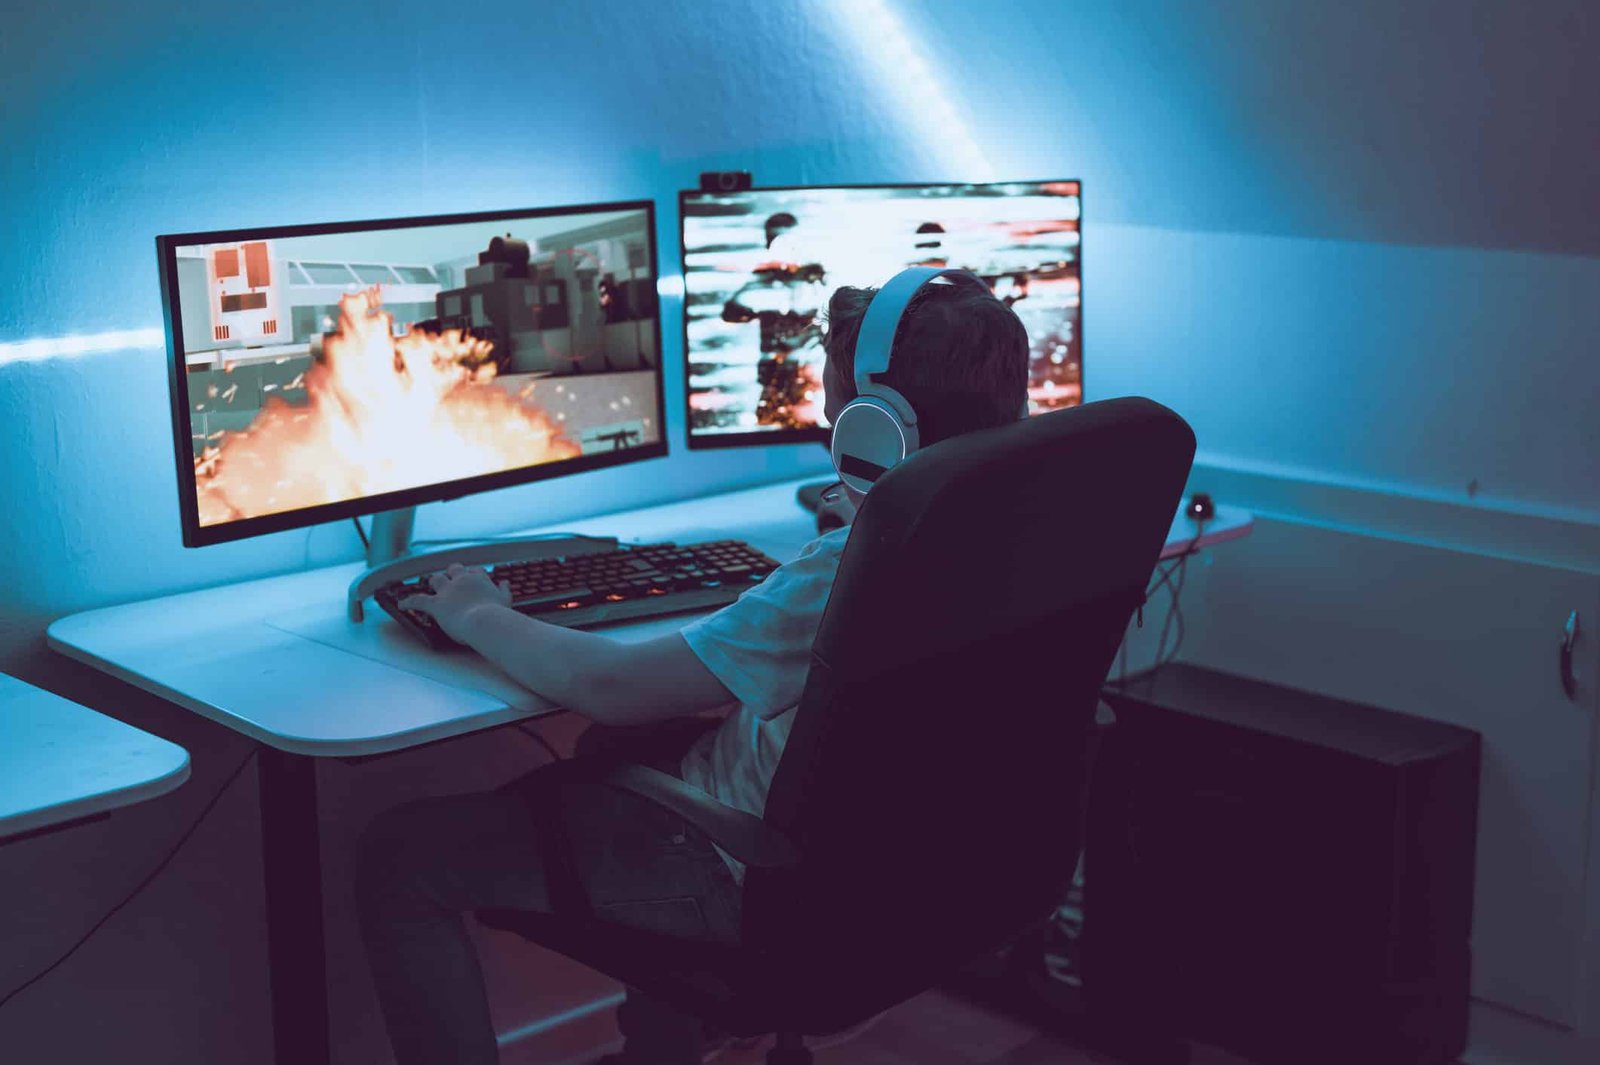 6 Biggest Online Gaming Risks And How To Avoid Them